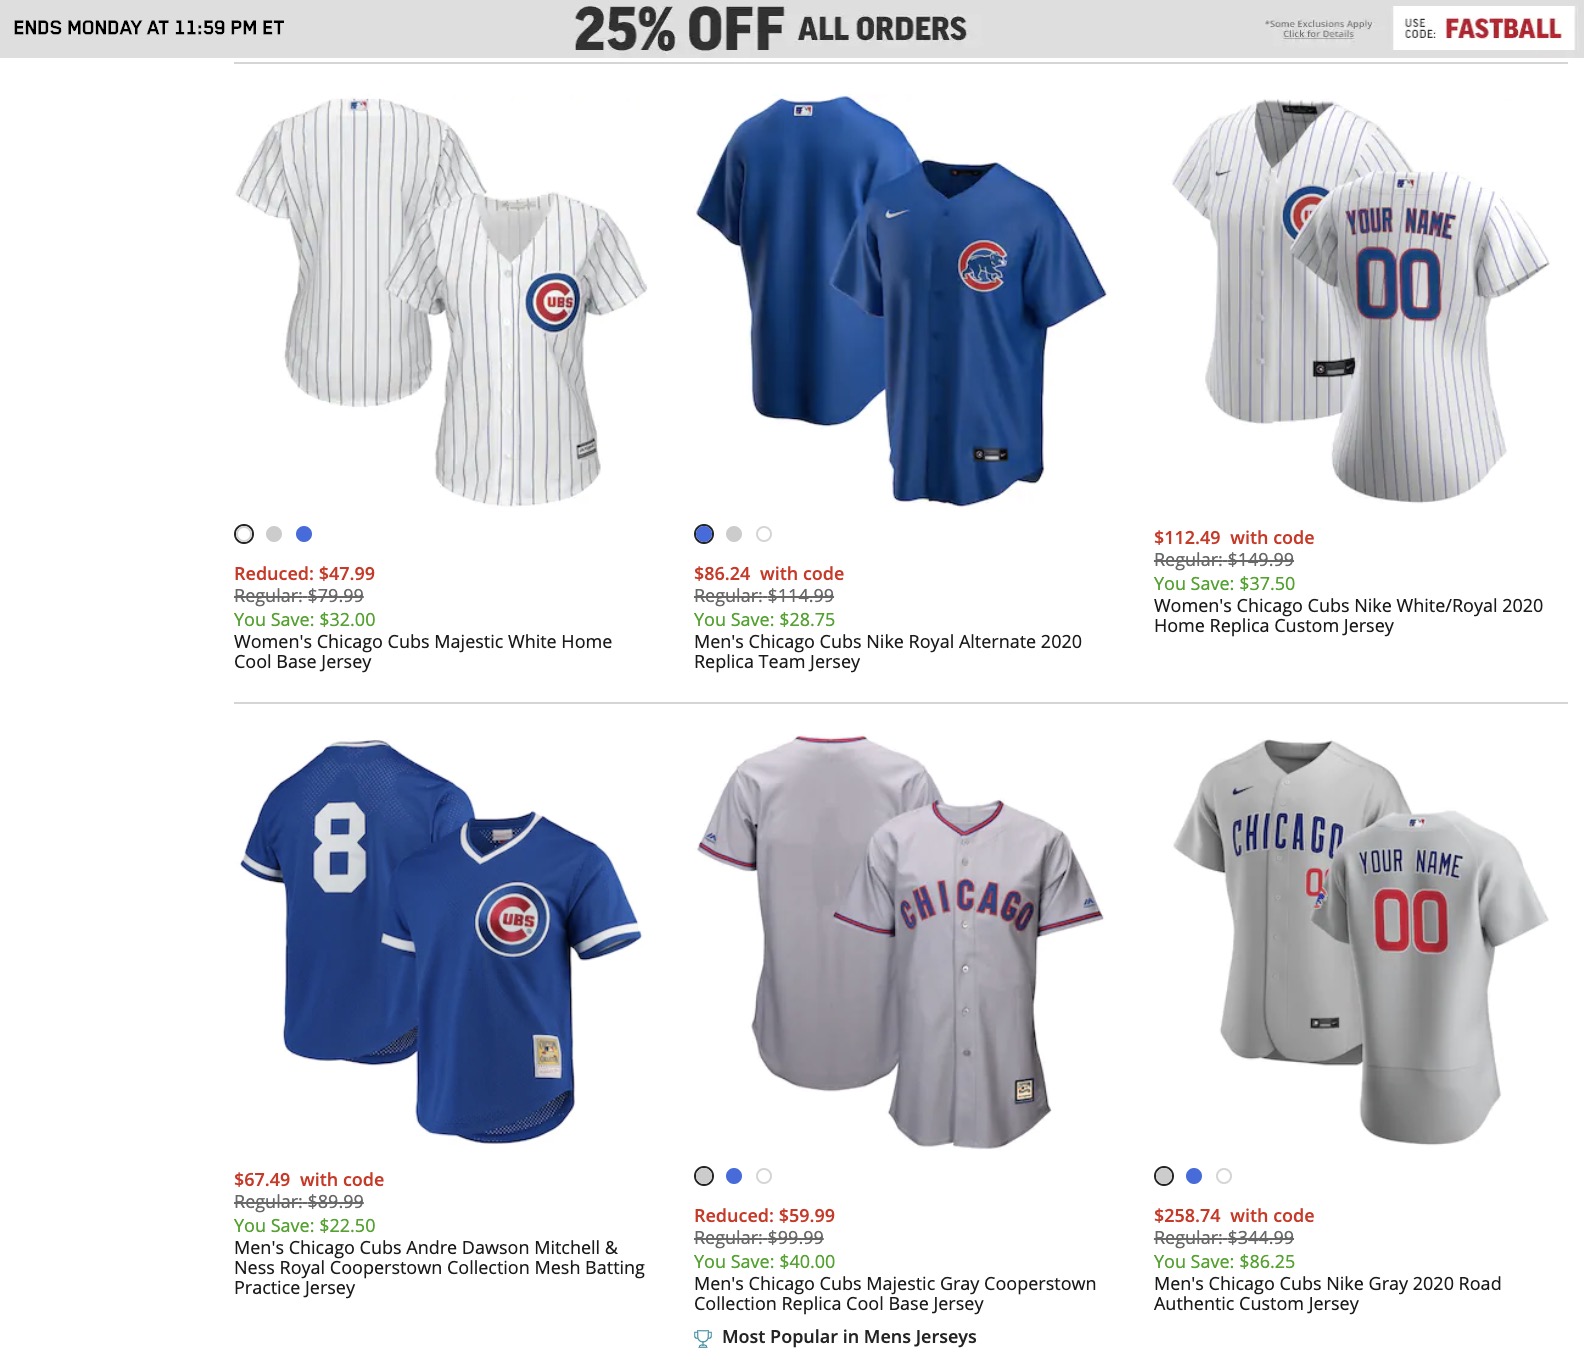 Bleacher Nation on X: The MLB Shop is taking 25% OFF all orders